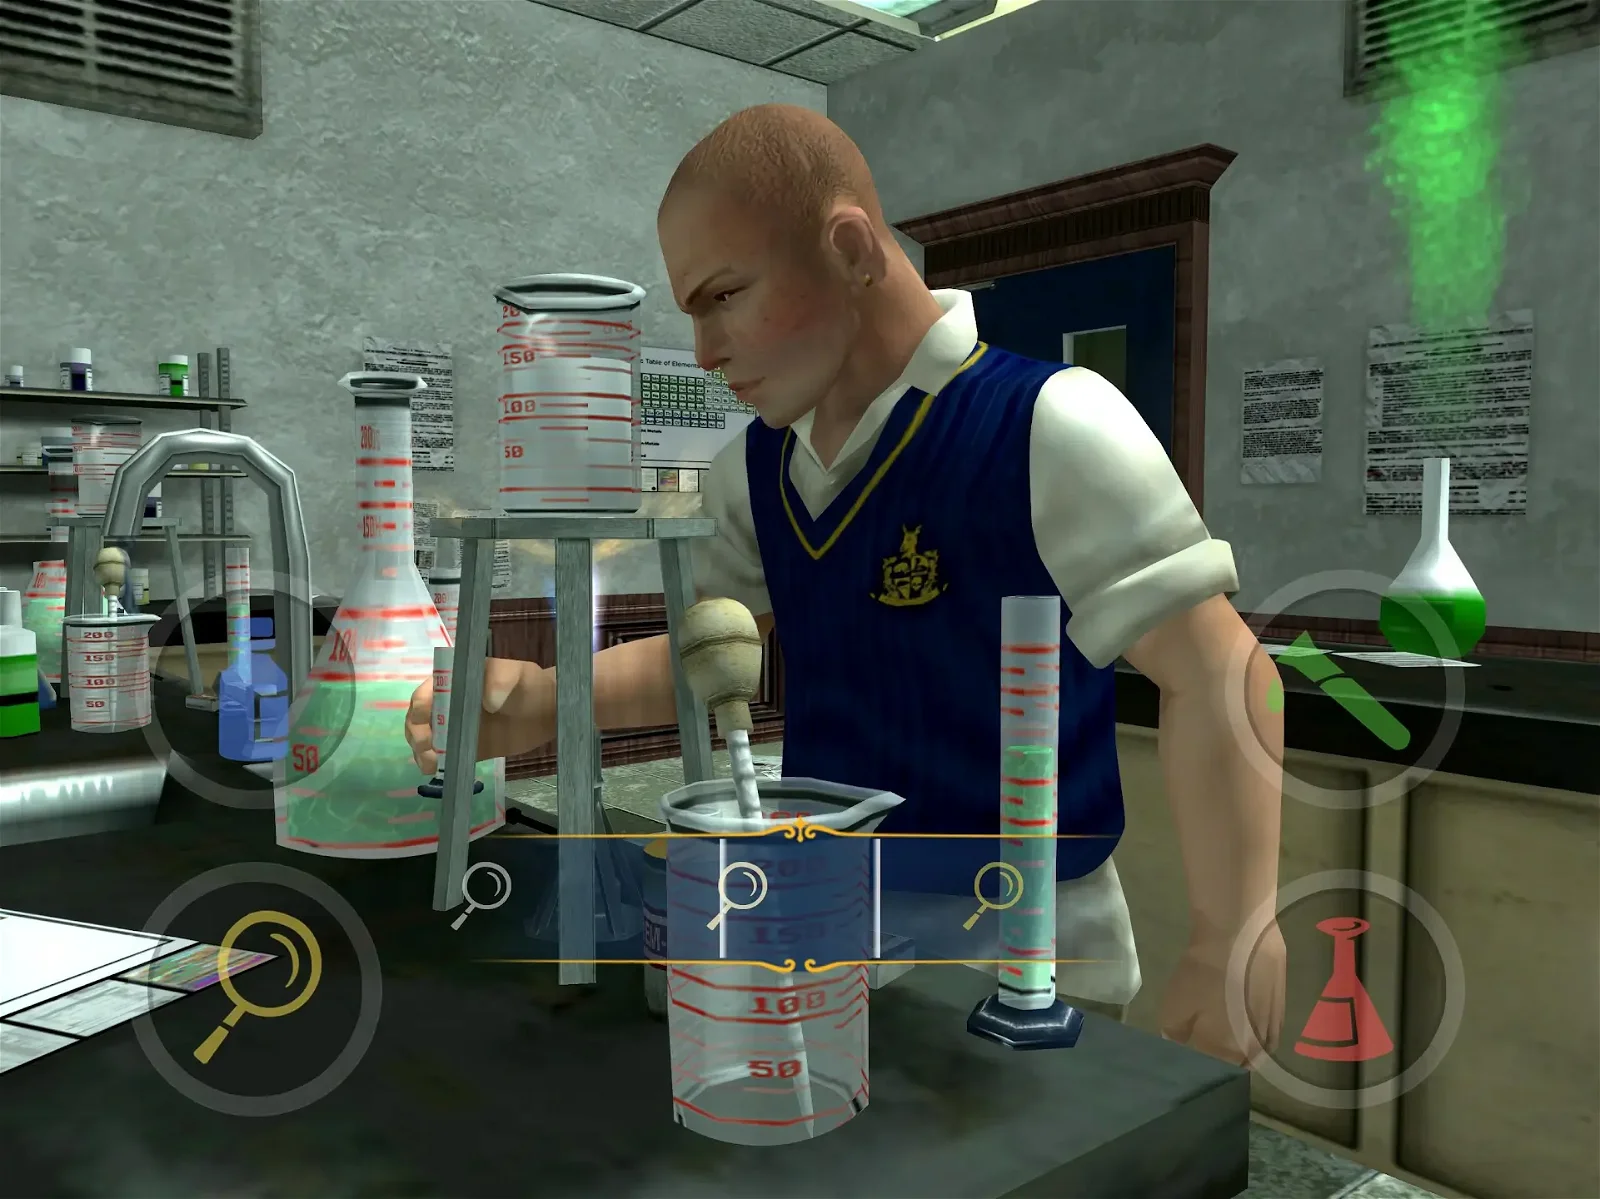 Download Bully: Anniversary Edition MOD APK v1.0.0.19 (Mod menu) for Android